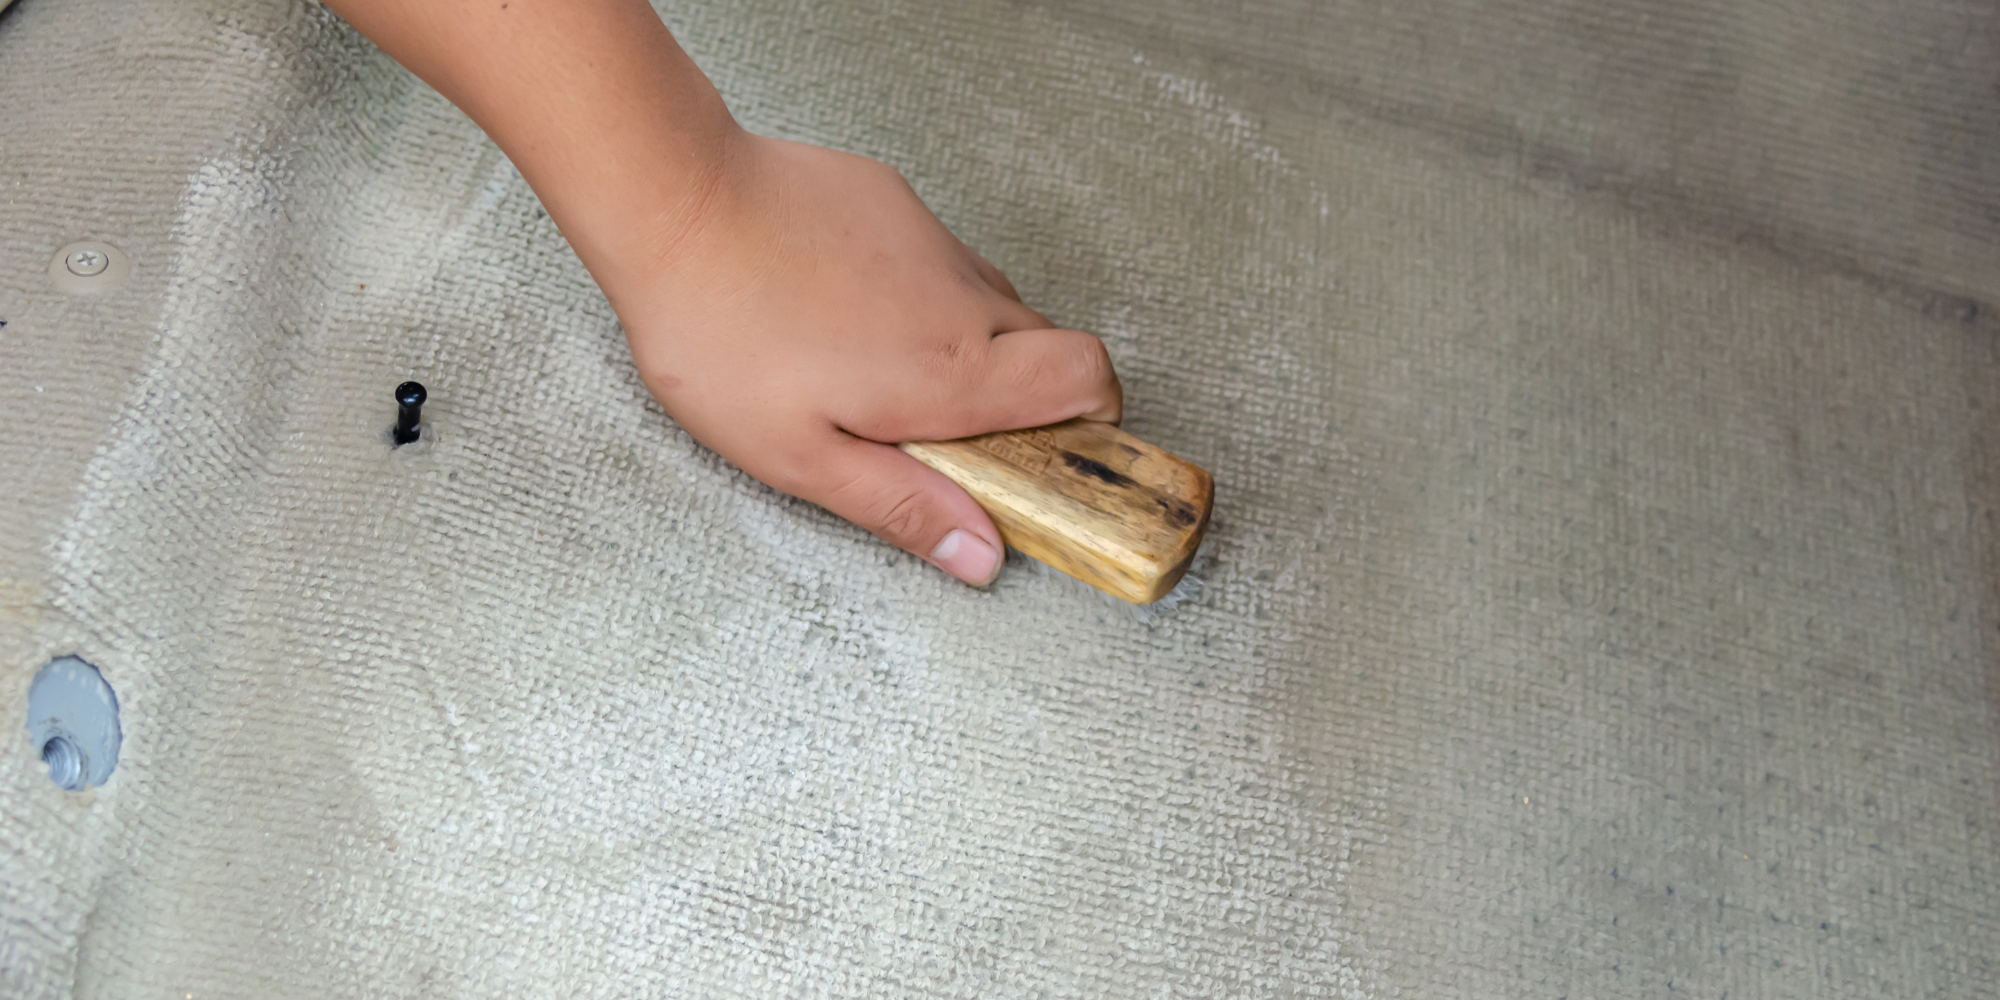 How To Remove Wax From Carpet